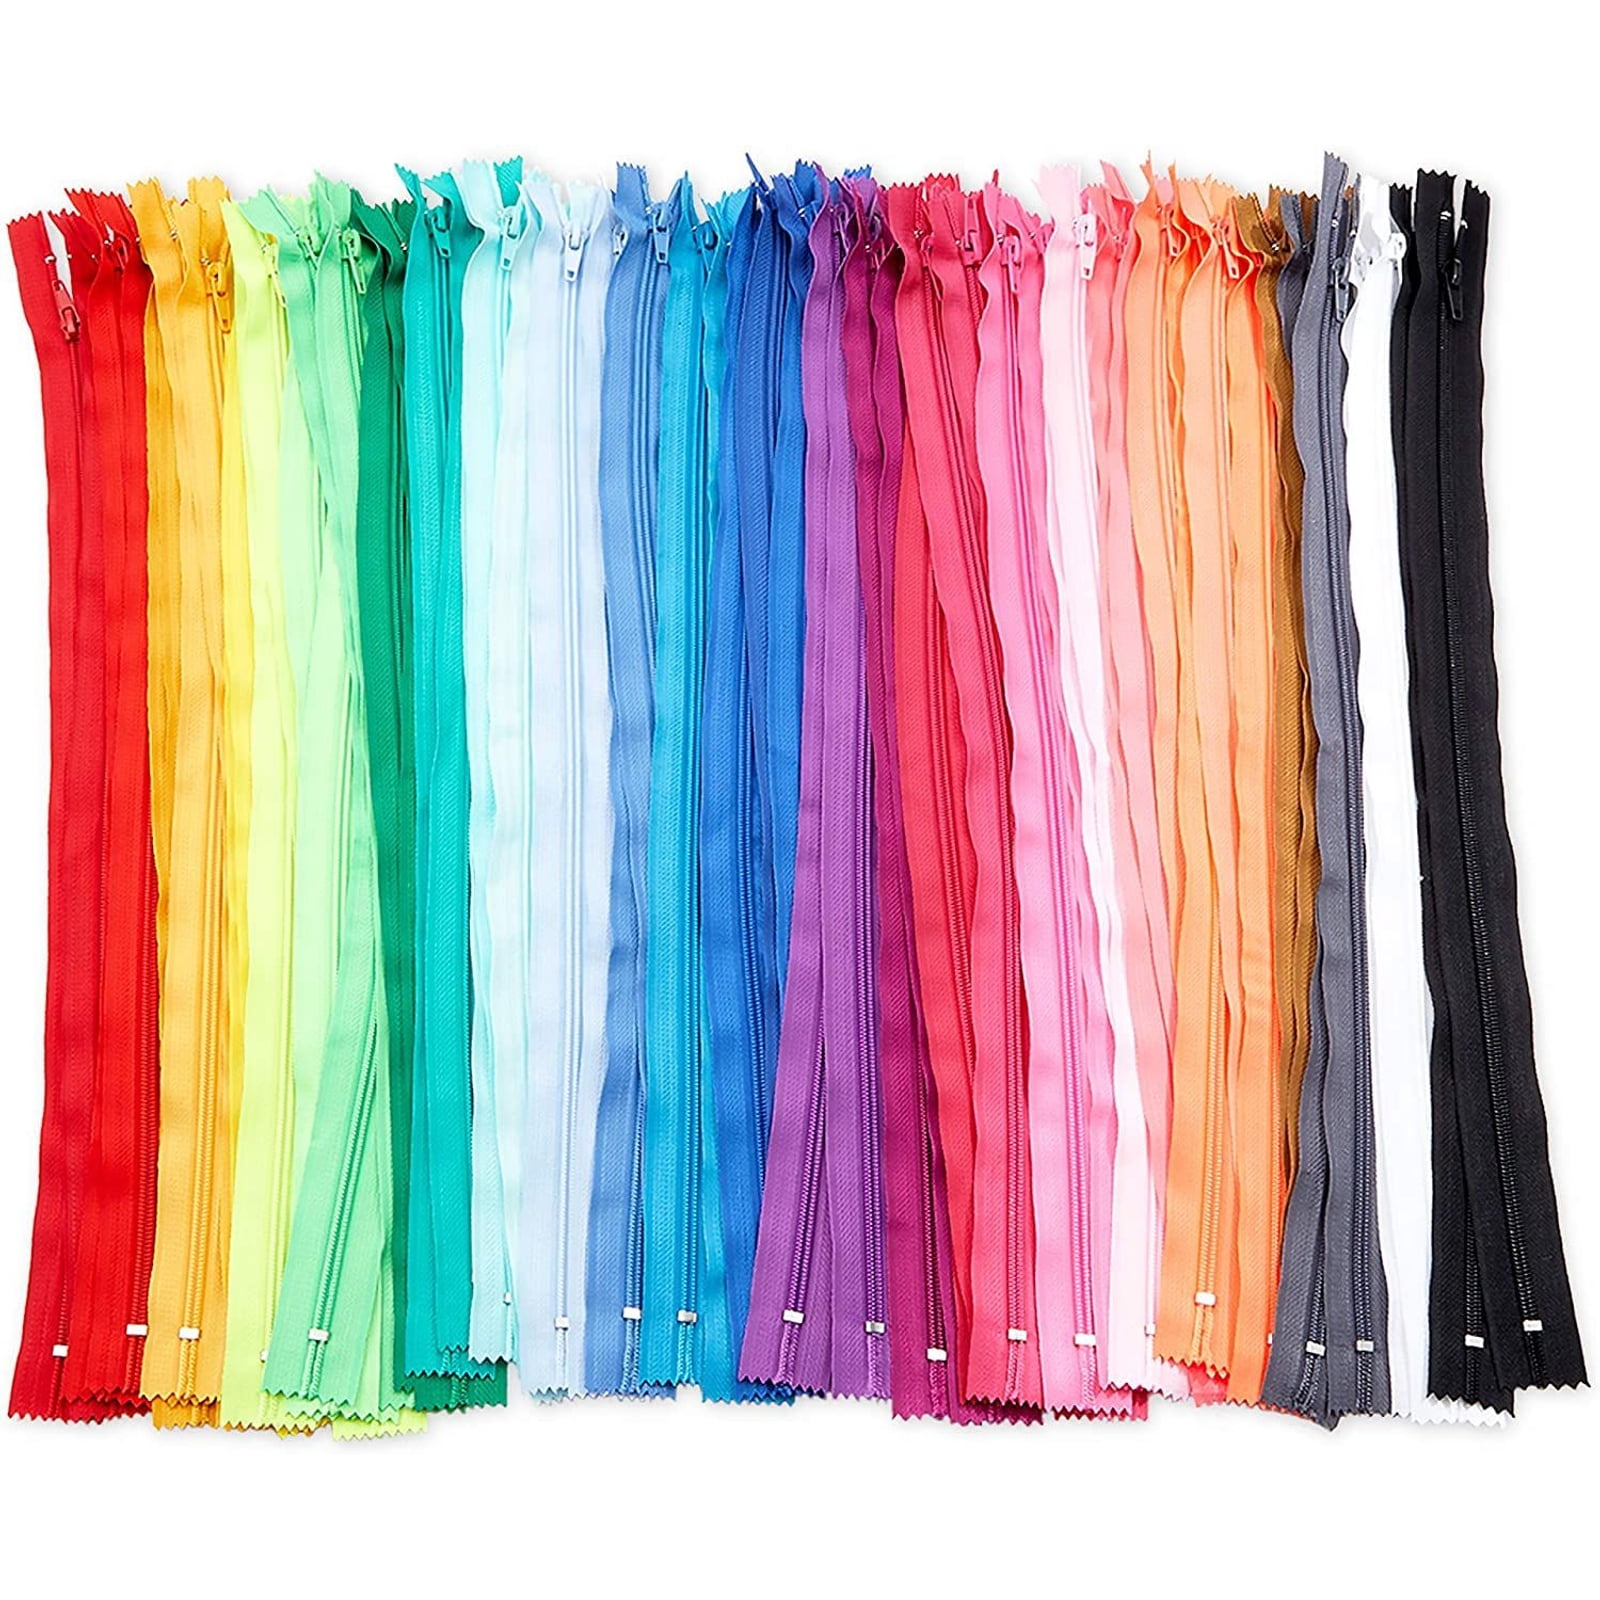 5 Nylon Coil Rainbow Zipper Tape by The Yard Zippers Bulk Teeth Coil Zippers  for Sewing – SnapS Tools